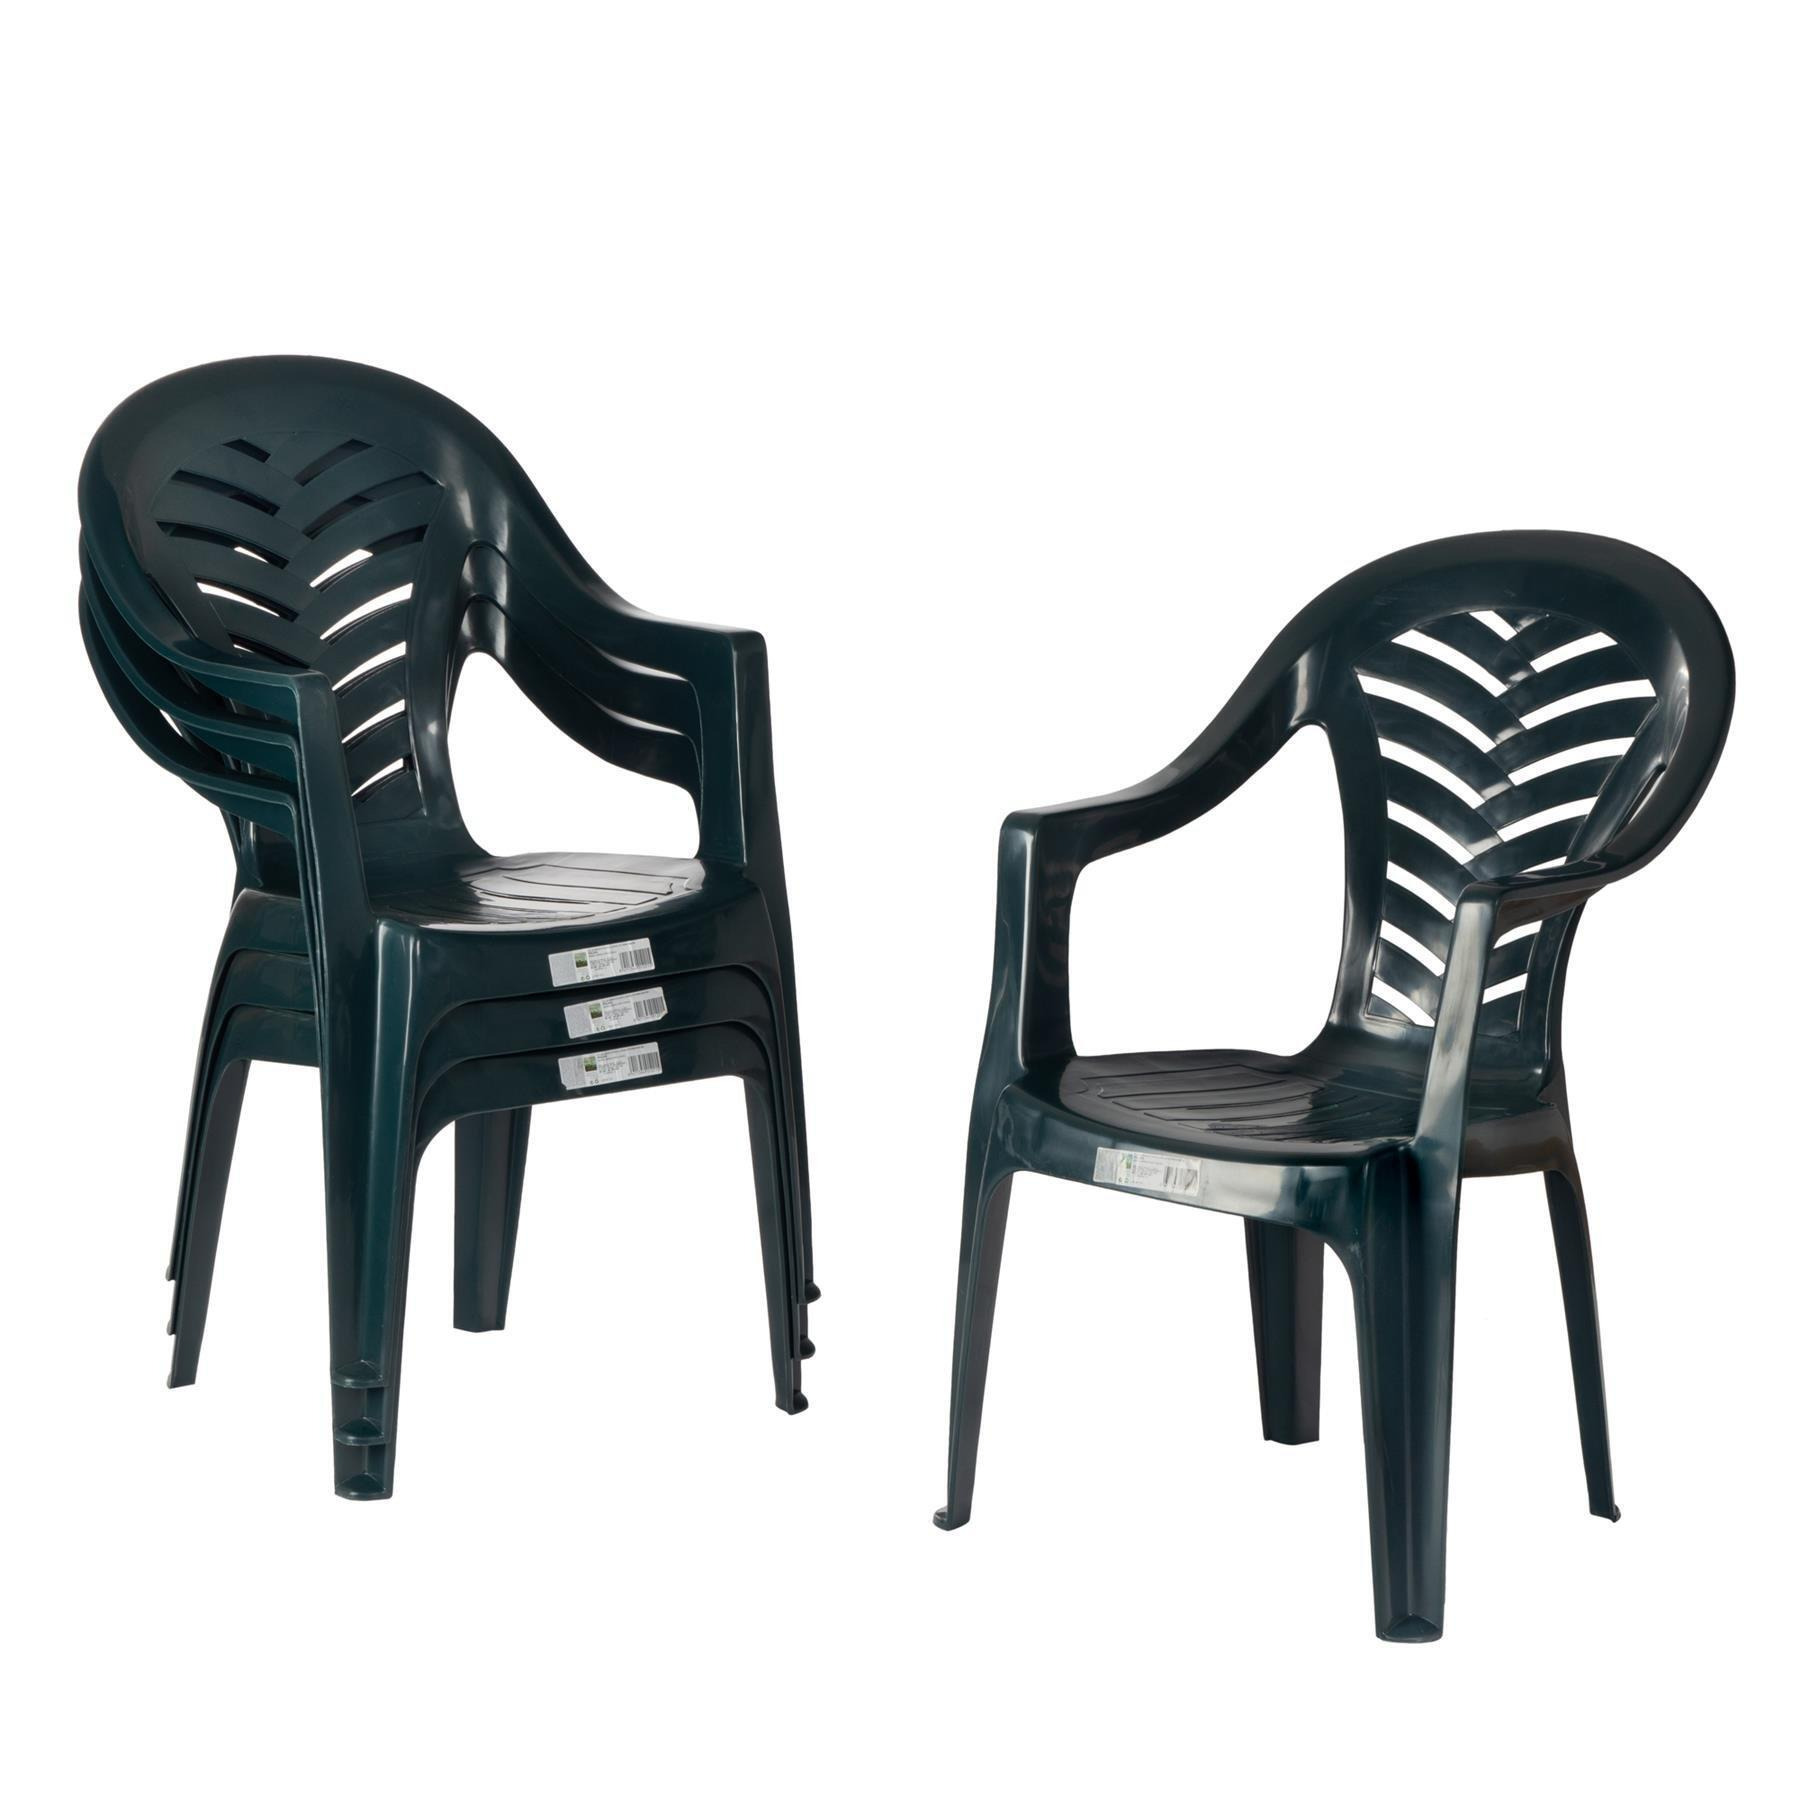 Palma Garden Dining Chairs Pack of 4 - image 1